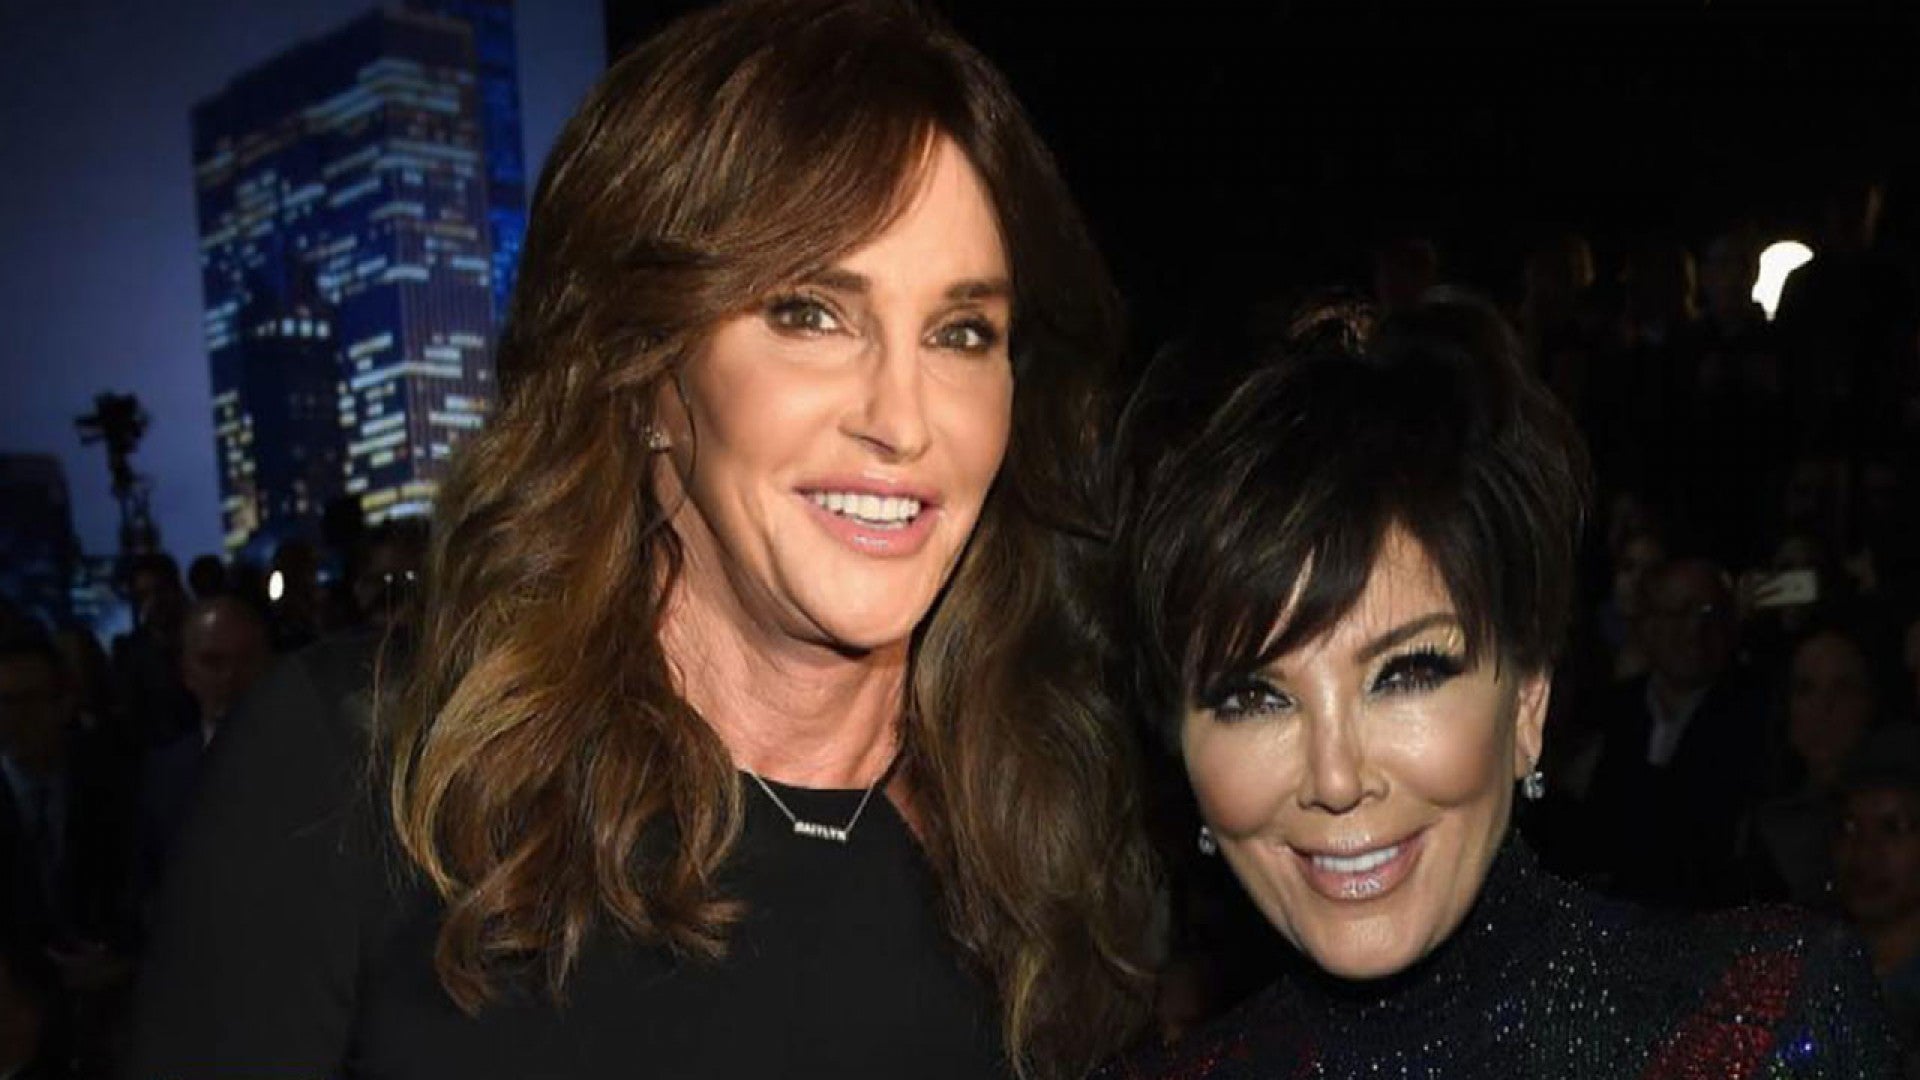 Caitlyn Jenner Says She And Kris Jenner Are Fine With Each